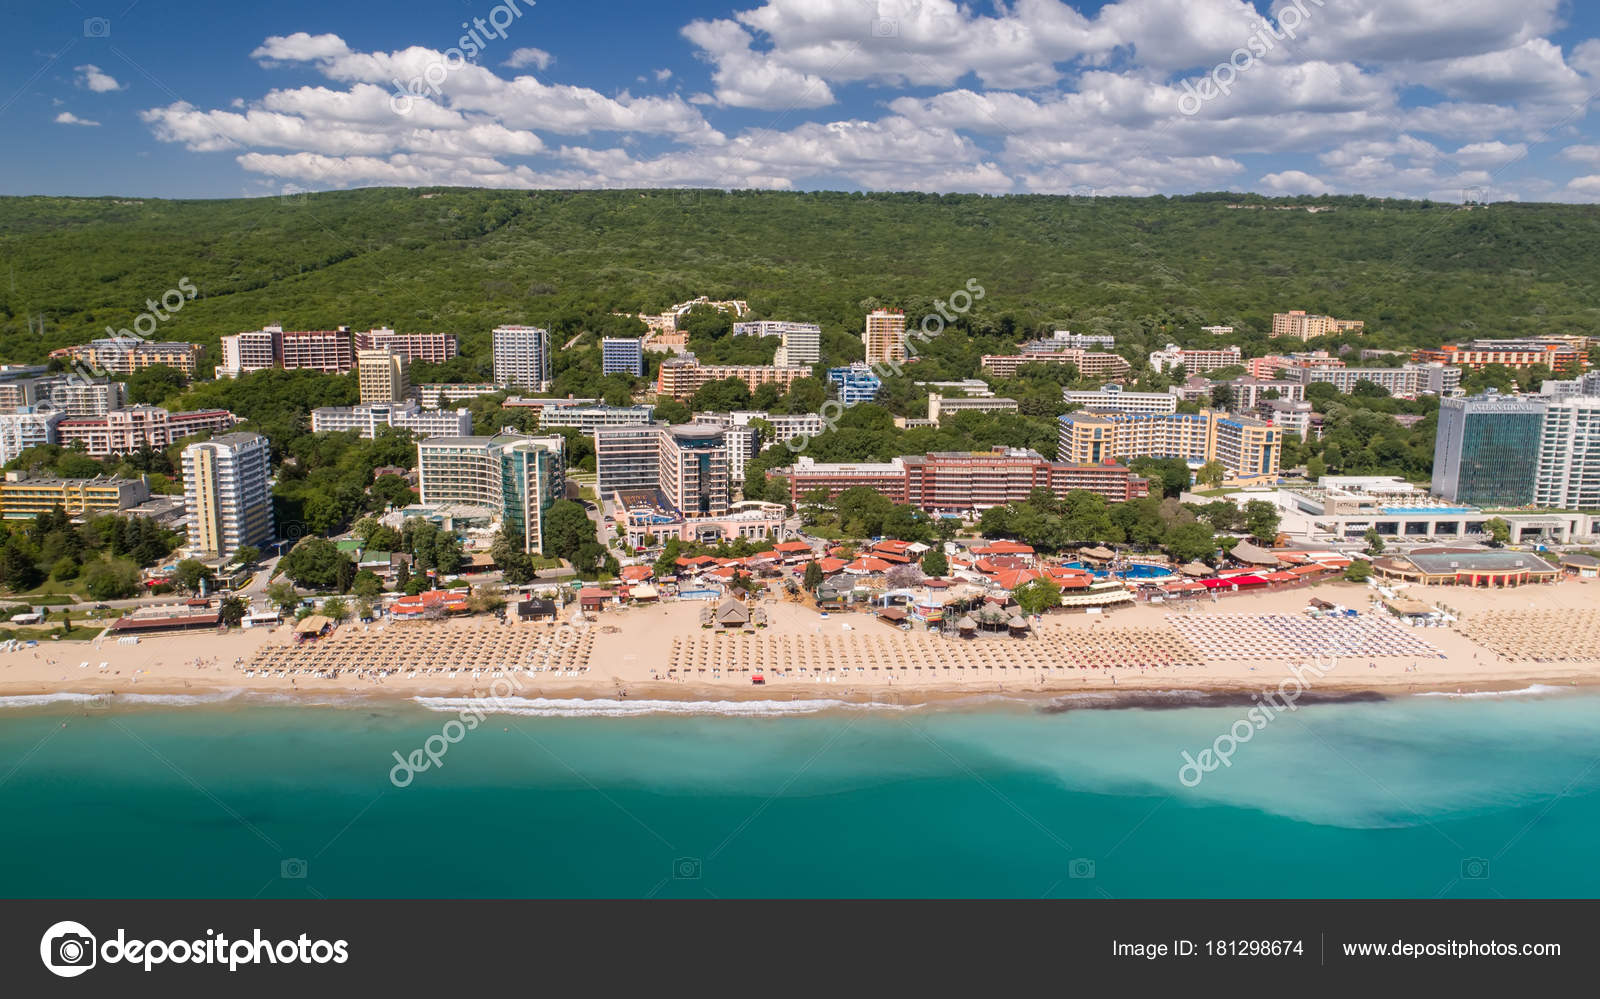 Aerial view of the beach and hotels in Golden Sands, Zlatni Piasaci. 